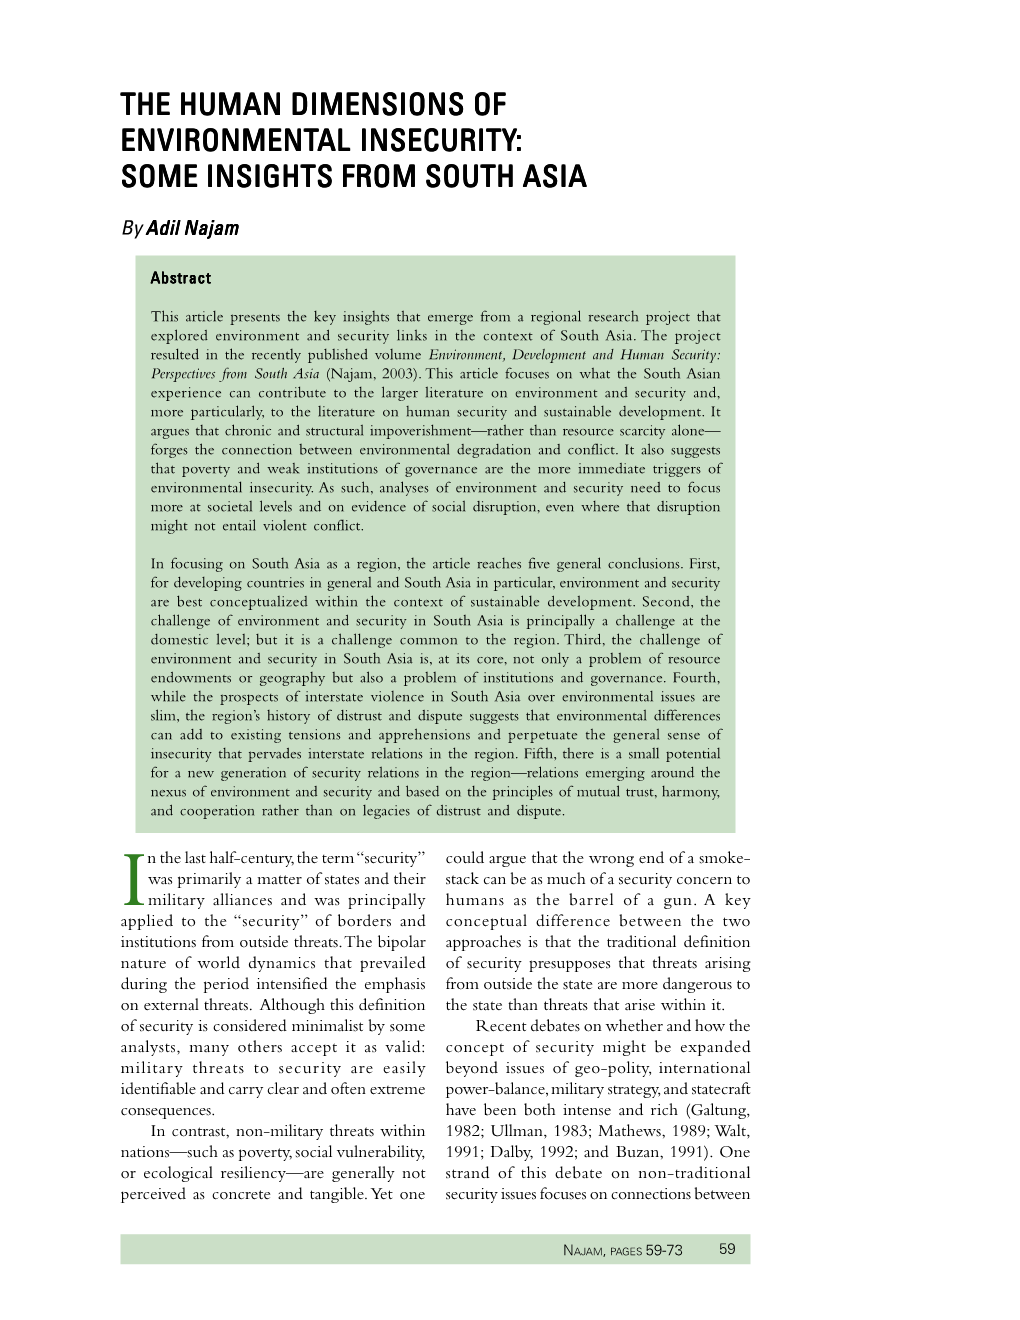 Some Insights from South Asia